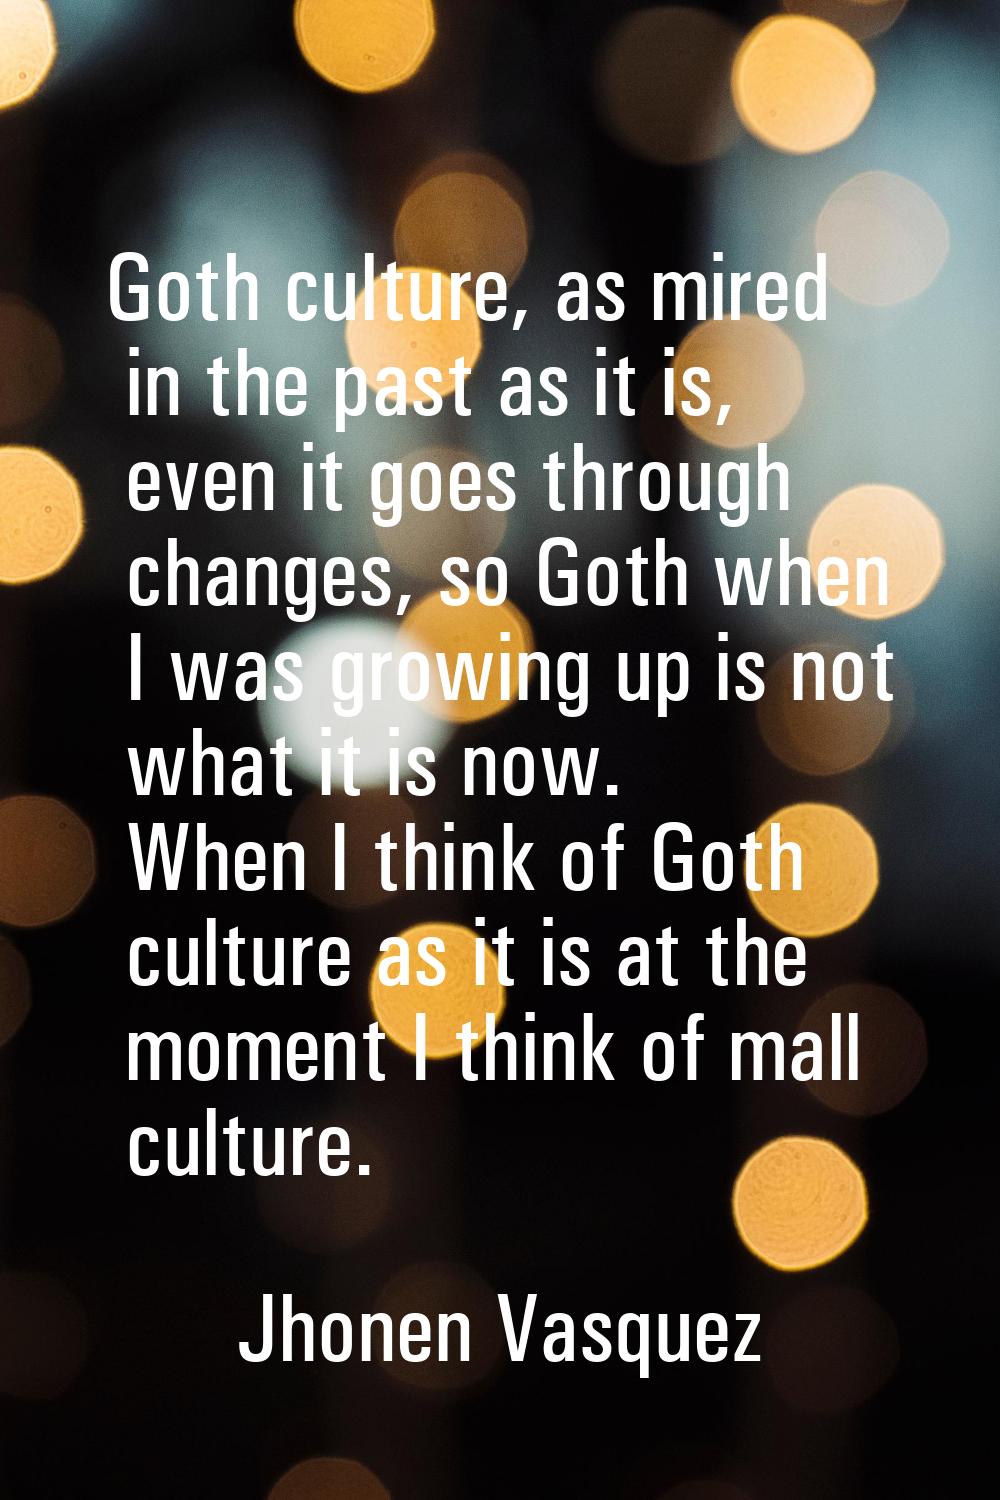 Goth culture, as mired in the past as it is, even it goes through changes, so Goth when I was growi